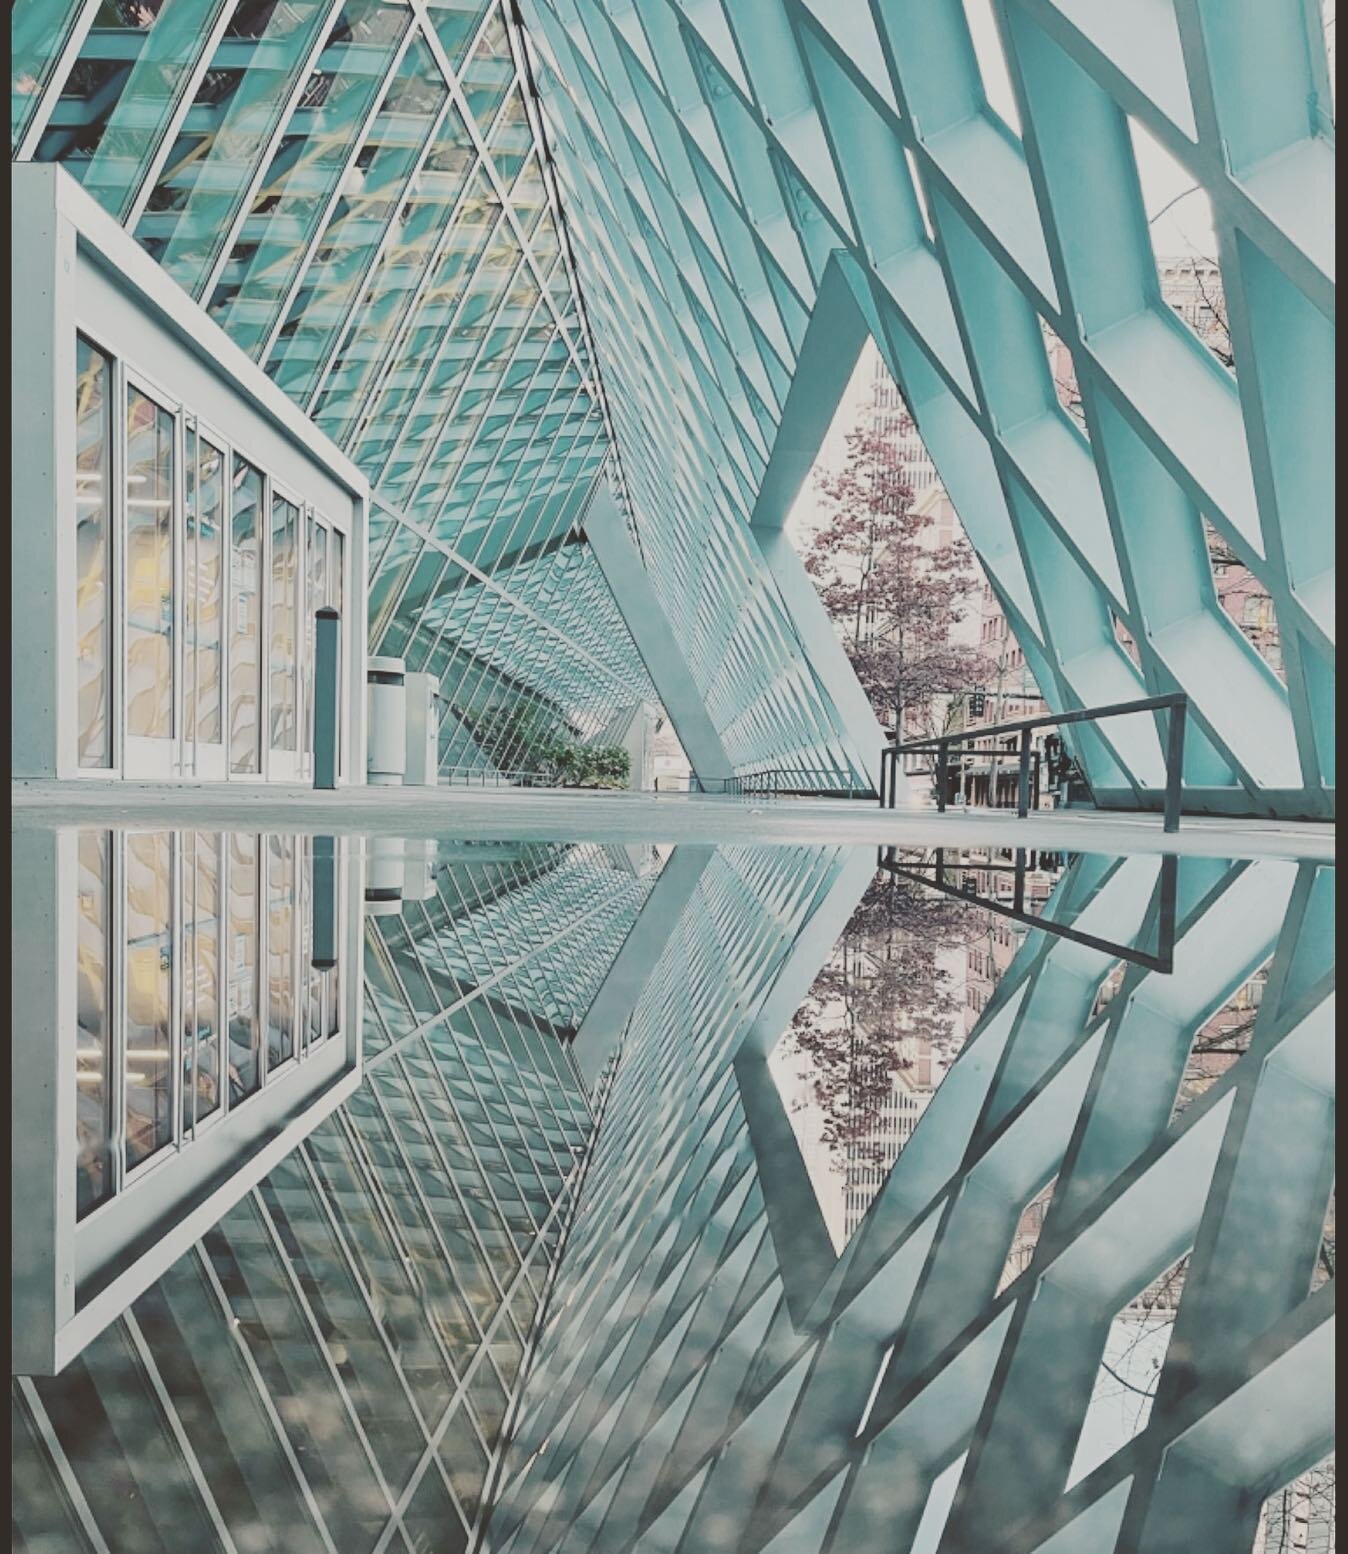 Happy Birthday to Mr. Rem Koolhaas an amazing Dutch architect known for many building such as the Seattle Library. A weaving web of steel and glass.

Photo | Unknown 

#architecture #web #weave #glass #designnerd #buildinglove